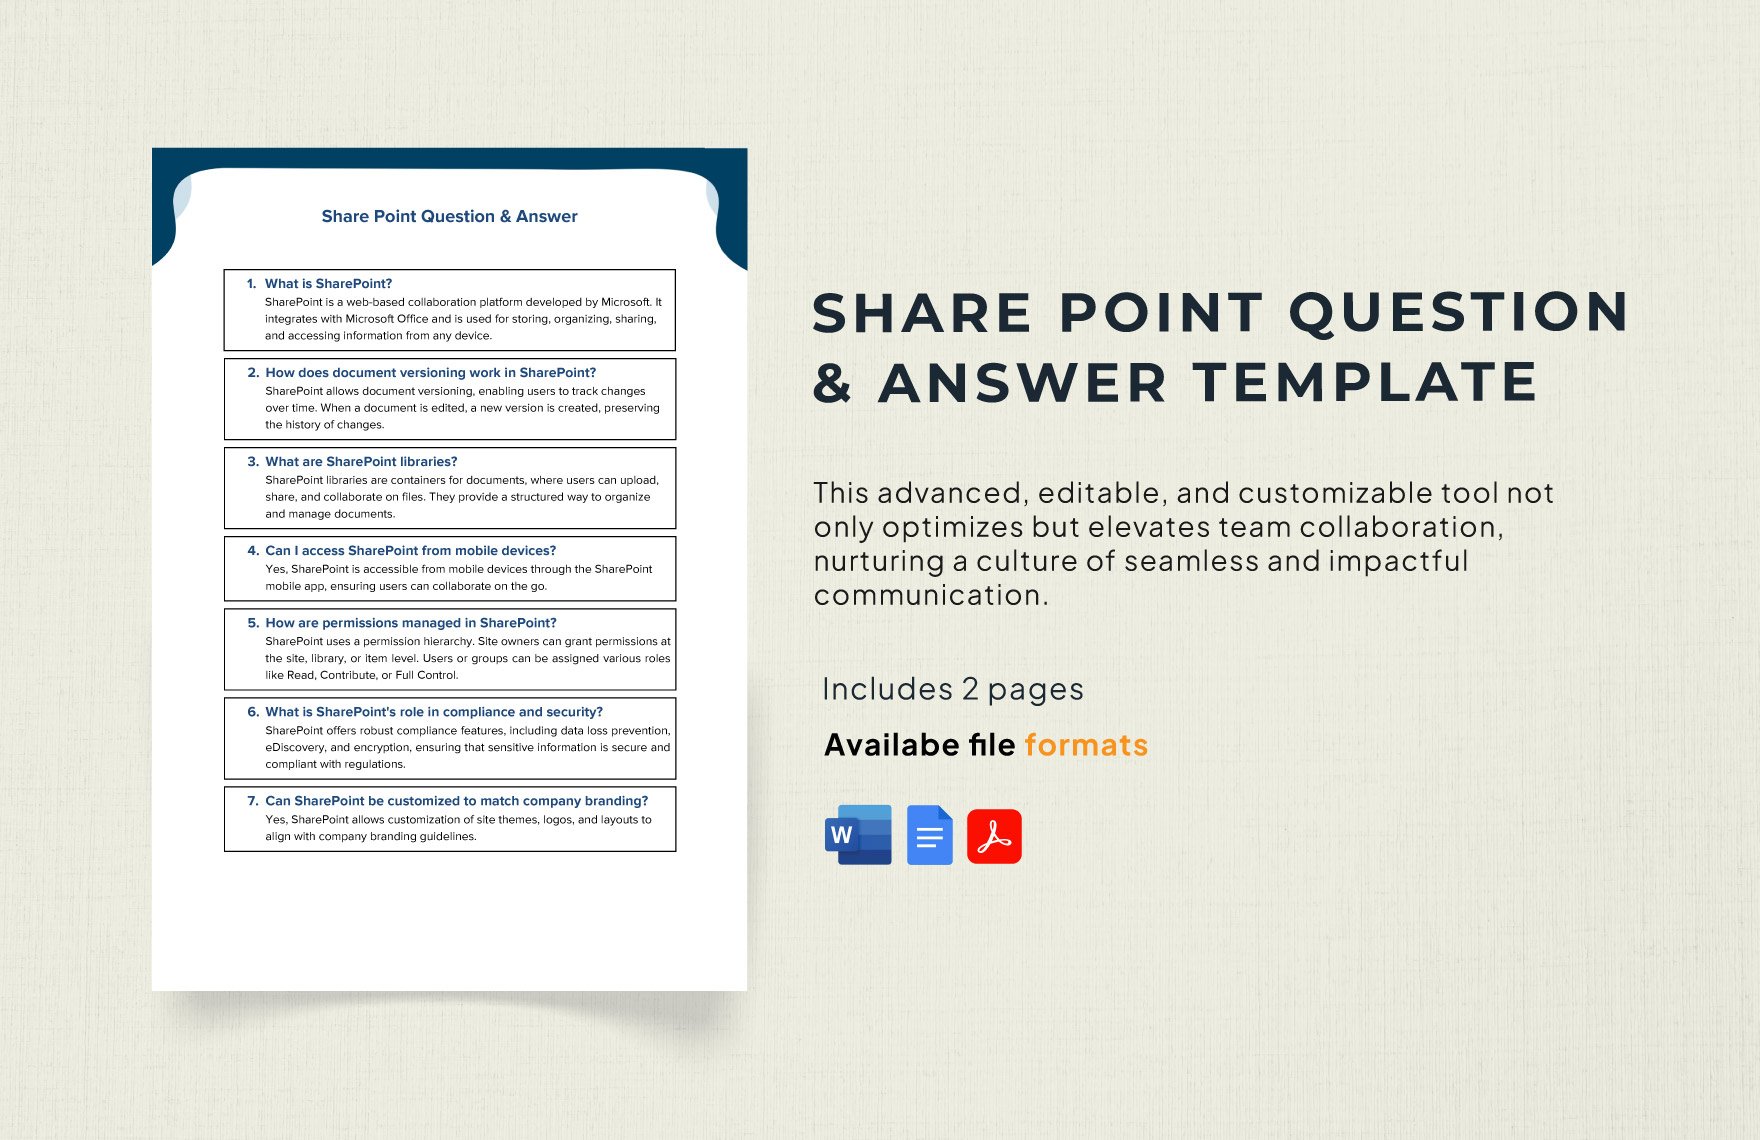 Share Point Question & Answer Template